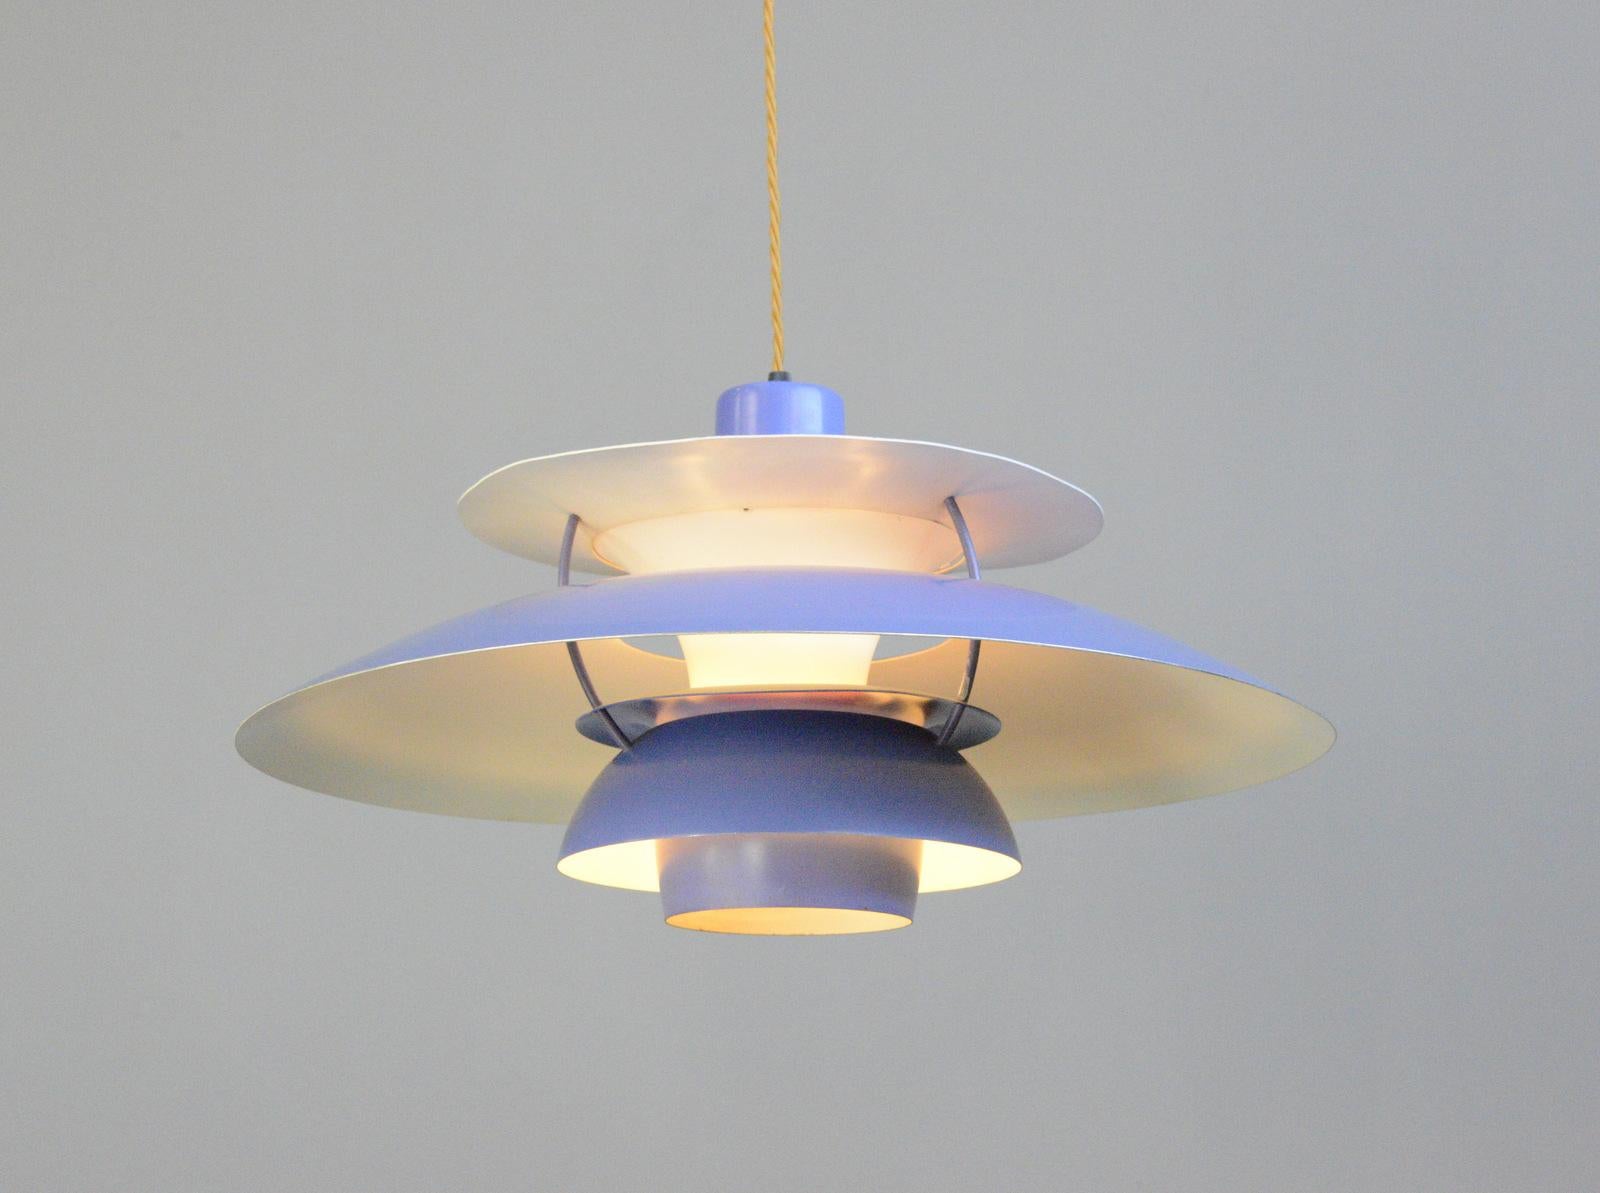 Blue Model PH5 pendant lights by Louis Poulson Circa 1960s

- Comes with 150cm of cable
- Takes E27 fitting bulbs
- Made from aluminium
- Designed by Poul Henningsen
- Made by Louis Poulson
- Model PH5
- Danish ~ 1960s
- 50cm wide x 26cm